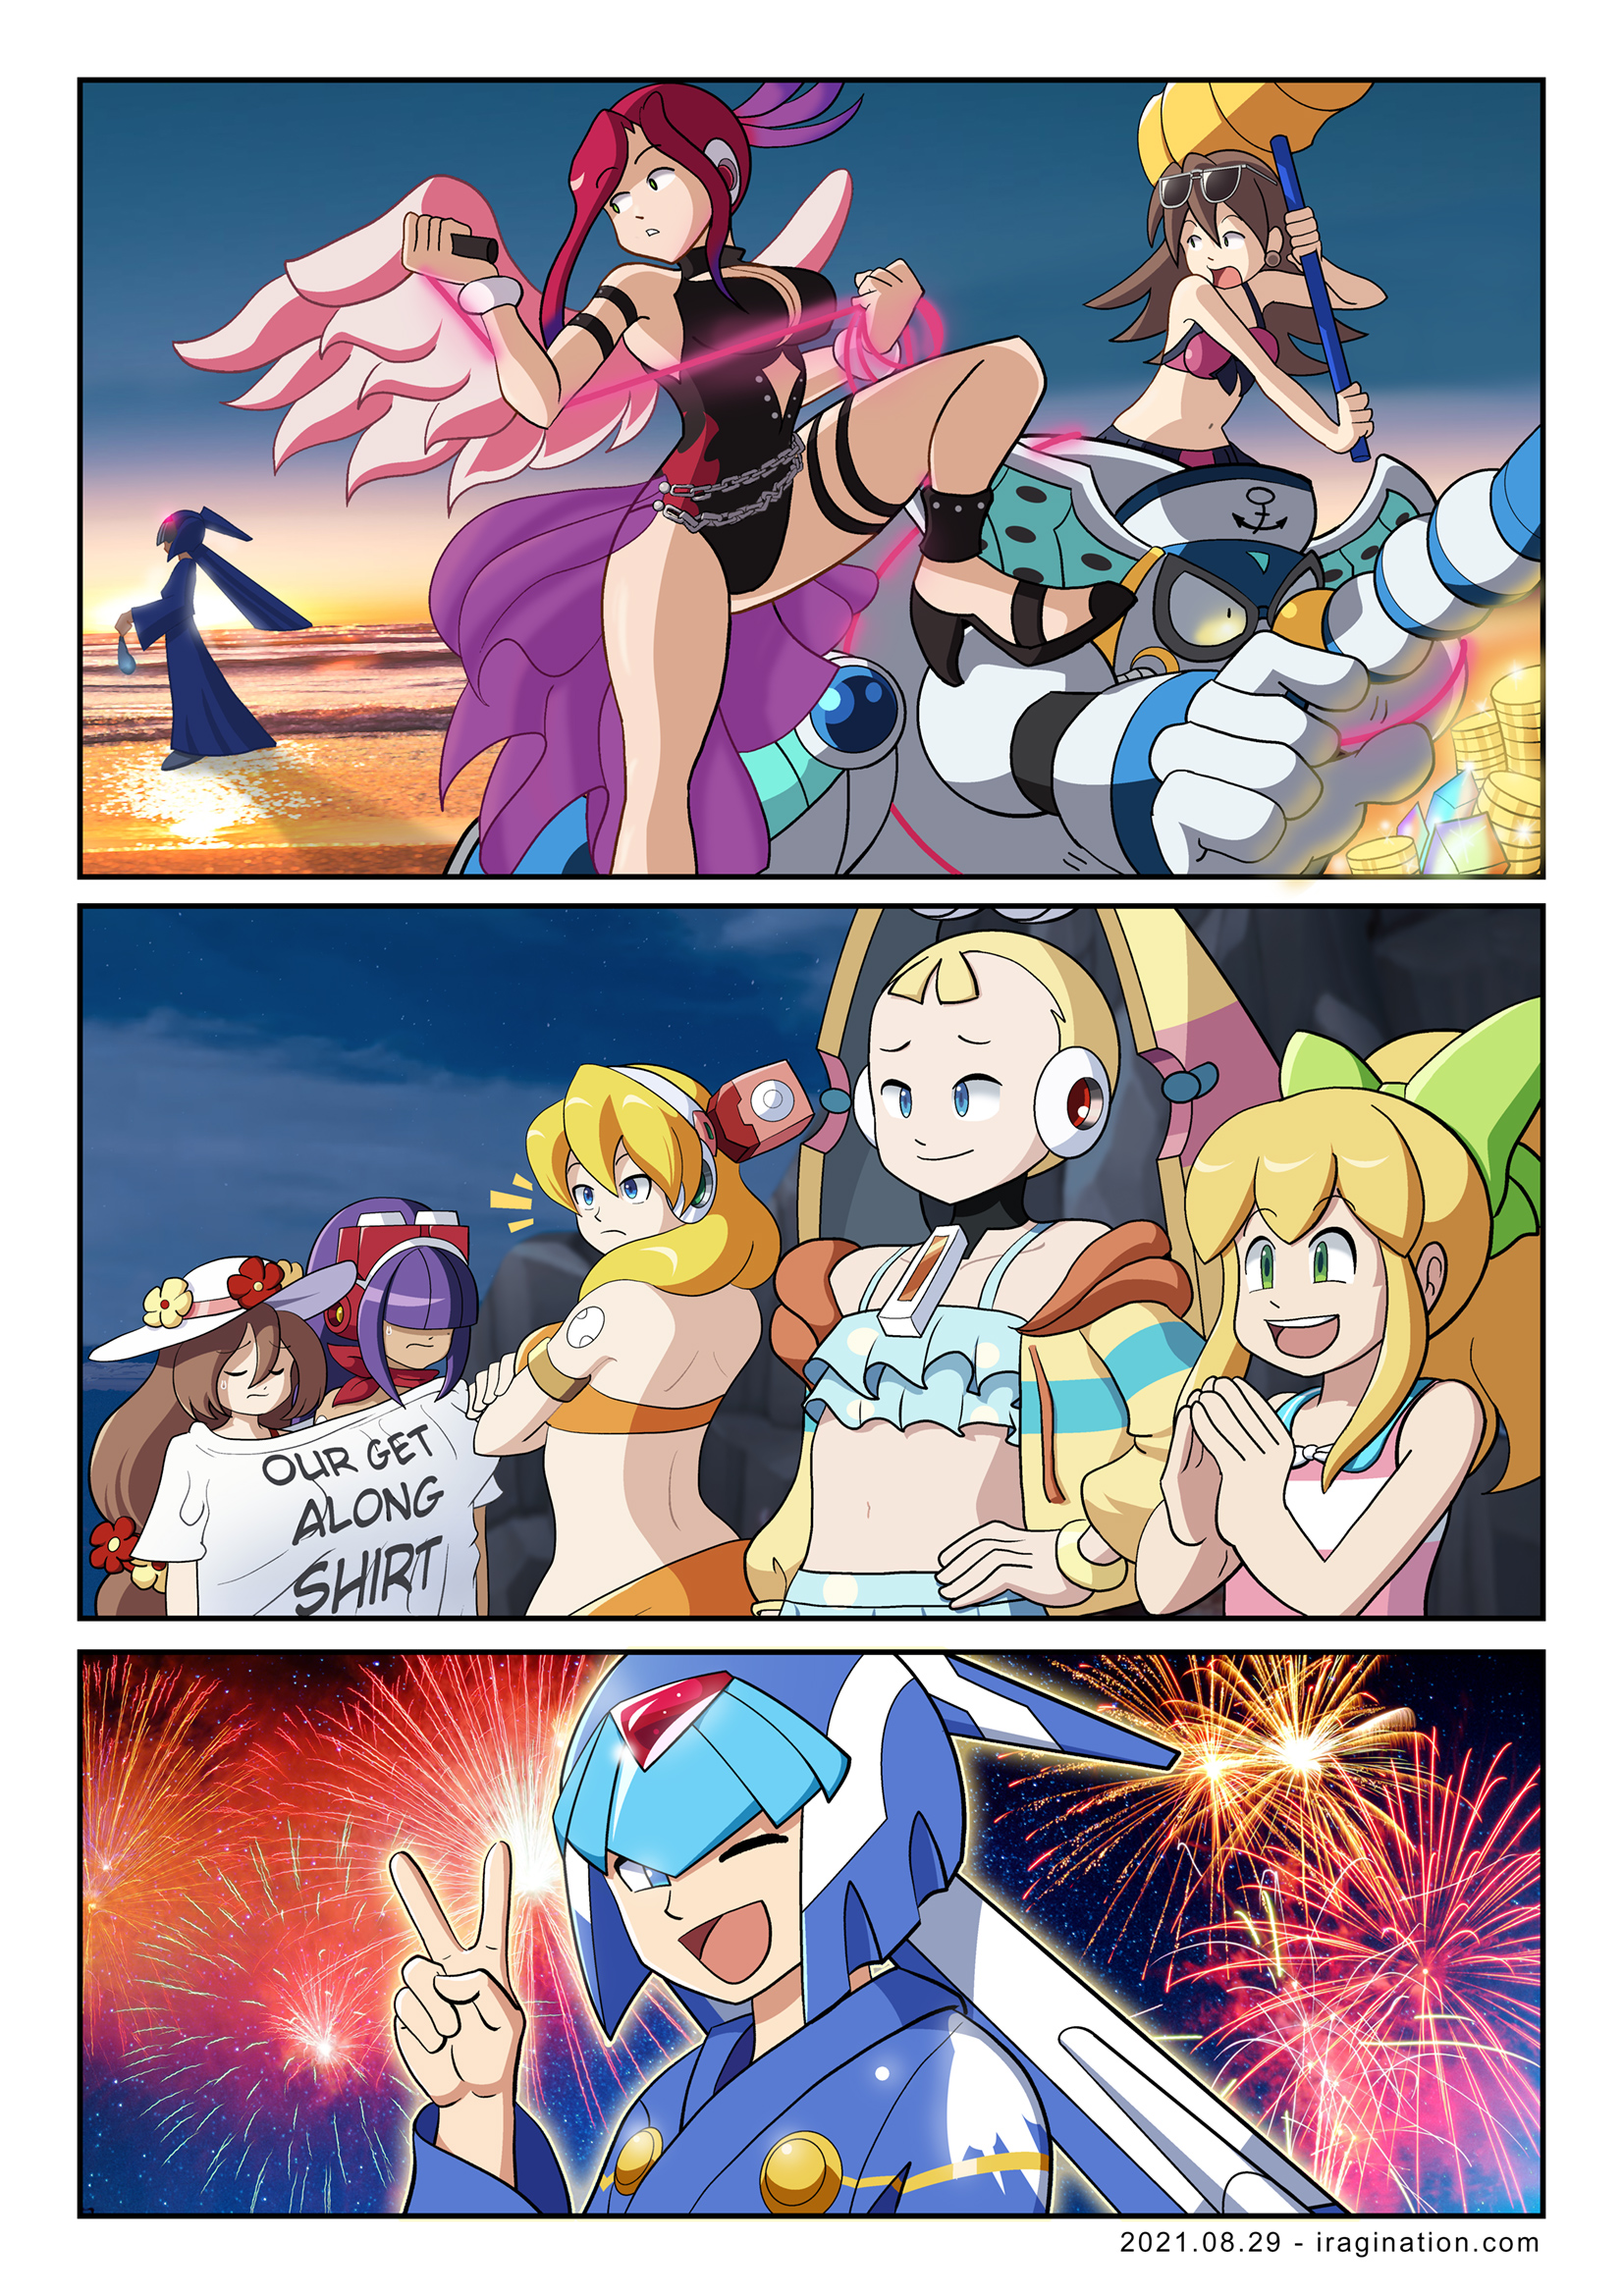 Summer Vacation / Fireworks and Lantern Festival 2021- Rockman X DiVE
I missed many Rockman X DiVE events during the summer. They showed up so quickly. [url=https://www.iragination.com/illust/displayimage.php?pid=521]Like last year[/url], at least I managed to make this illustration with some memorable moments. Overall, the game has delivered a lot of varied and interesting content.

With so many characters, this was a very challenging piece. But it was fun to draw and an excuse to test some new techniques.

[b]References[/b]
[url=https://www.facebook.com/CAPCOM.RXD/videos/879402822649085]Summer Treasure Hunt[/url]

[url=https://www.facebook.com/CAPCOM.RXD/videos/964662204315839]Swimsuit Pallette[/url]

[url=https://www.facebook.com/CAPCOM.RXD/posts/783102925719132]Swimsuit Roll - Revamped version[/url]

[url=https://www.facebook.com/CAPCOM.RXD/posts/807850213244403]Festive Leviathan[/url]

[b]Photos[/b]
[url=https://www.pexels.com/photo/scenic-view-of-ocean-during-sunset-1032650/]1[/url] [url=https://www.pexels.com/photo/plants-under-starry-sky-355887/]2[/url] [url=https://www.pexels.com/photo/fireworks-photo-634694/]3[/url] [url=https://www.pexels.com/photo/light-red-new-year-s-eve-colorful-33253/]4[/url]

Keywords: ferham Tron_Bonne leviathan flame_mammoth iris layer alia pallette roll